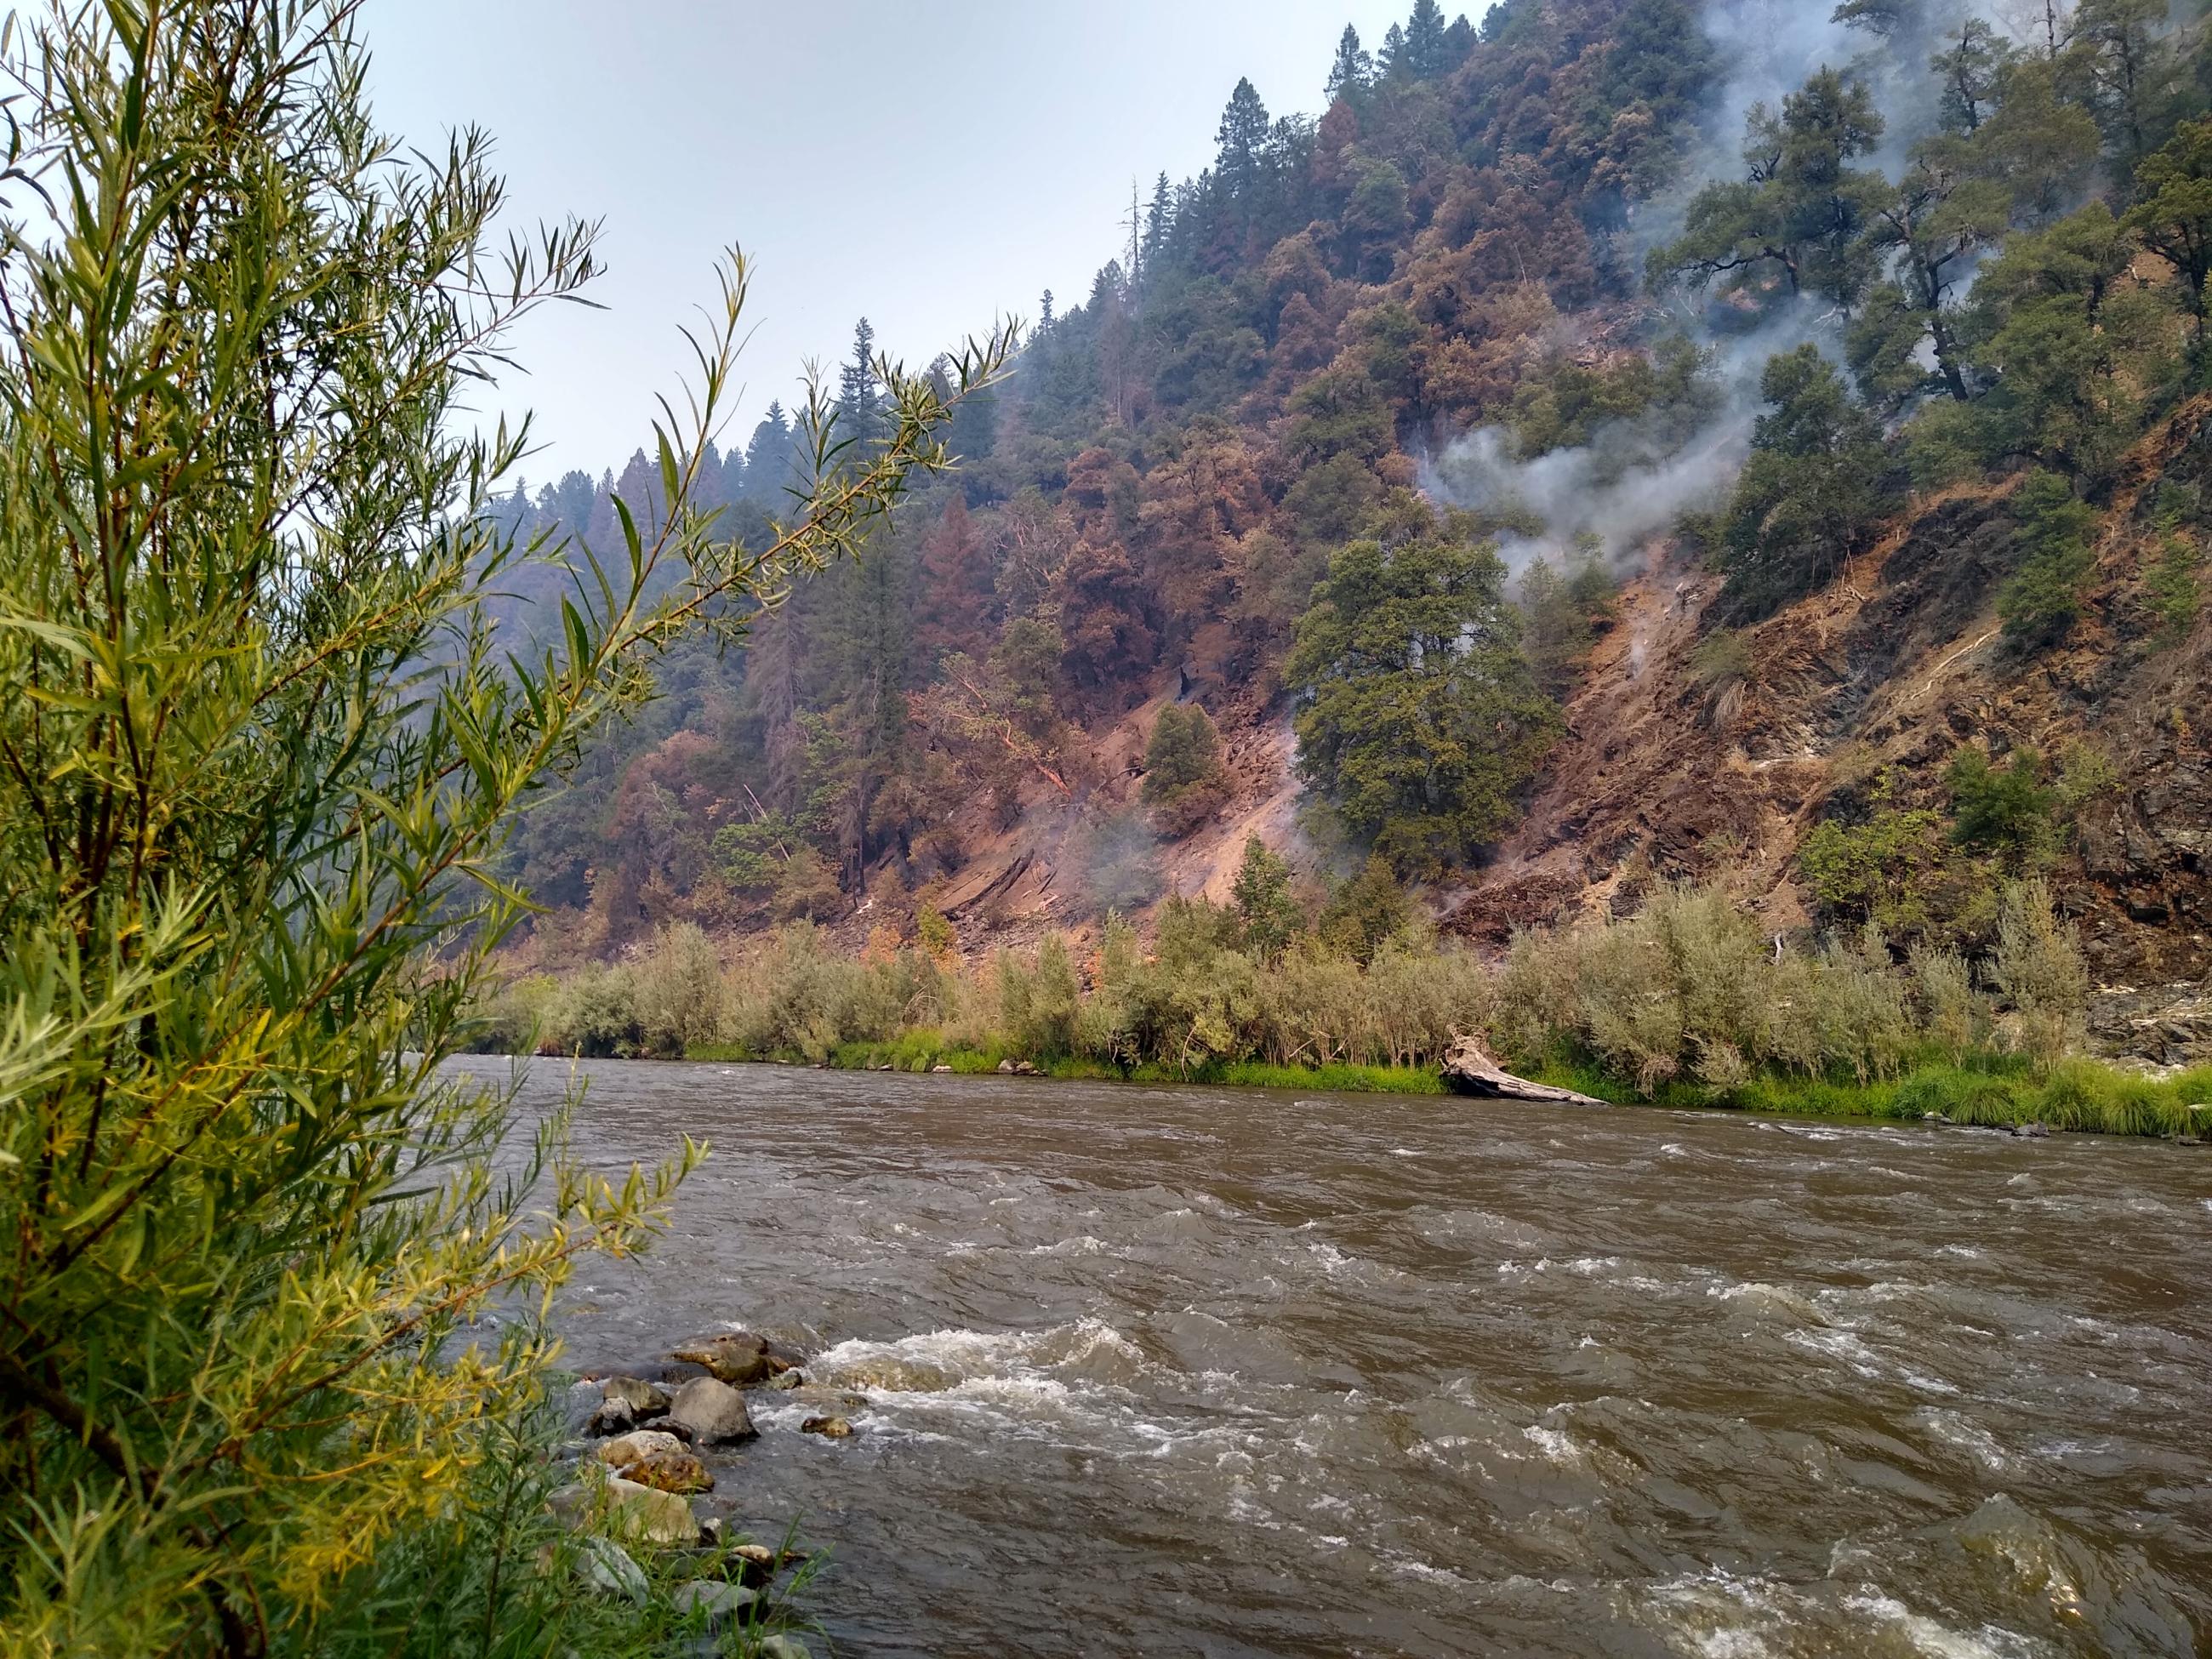 This photo shows low-intensity fire on the Ufish Fire, along the Klamath River on September 11.